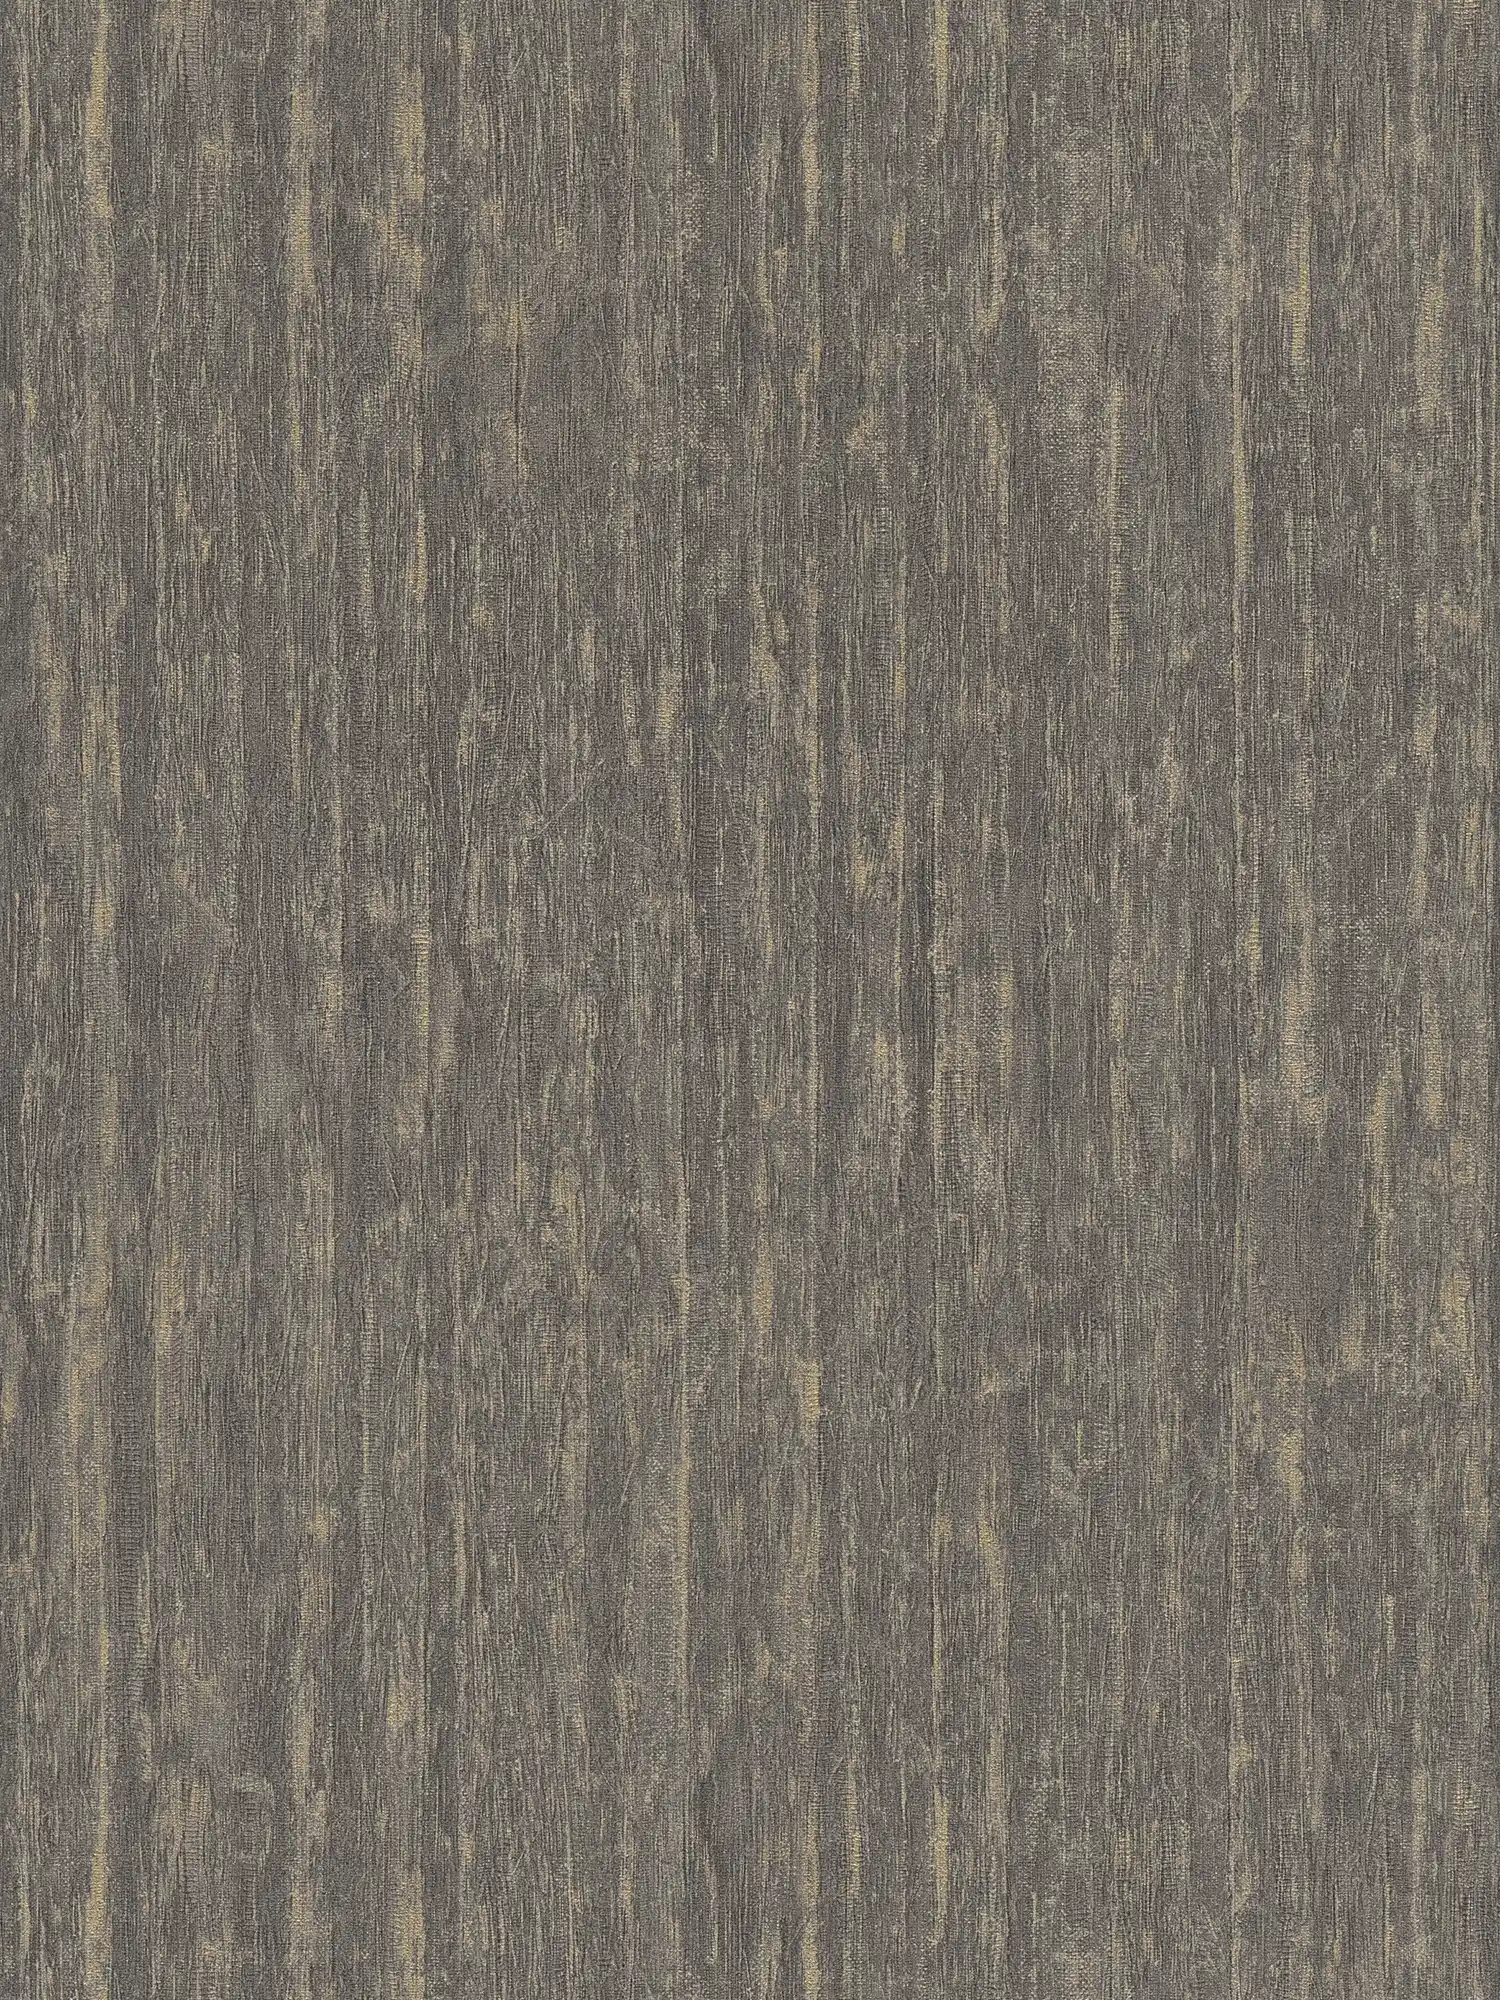 Non-woven wallpaper in plaster look with golden accents - brown, grey, gold
